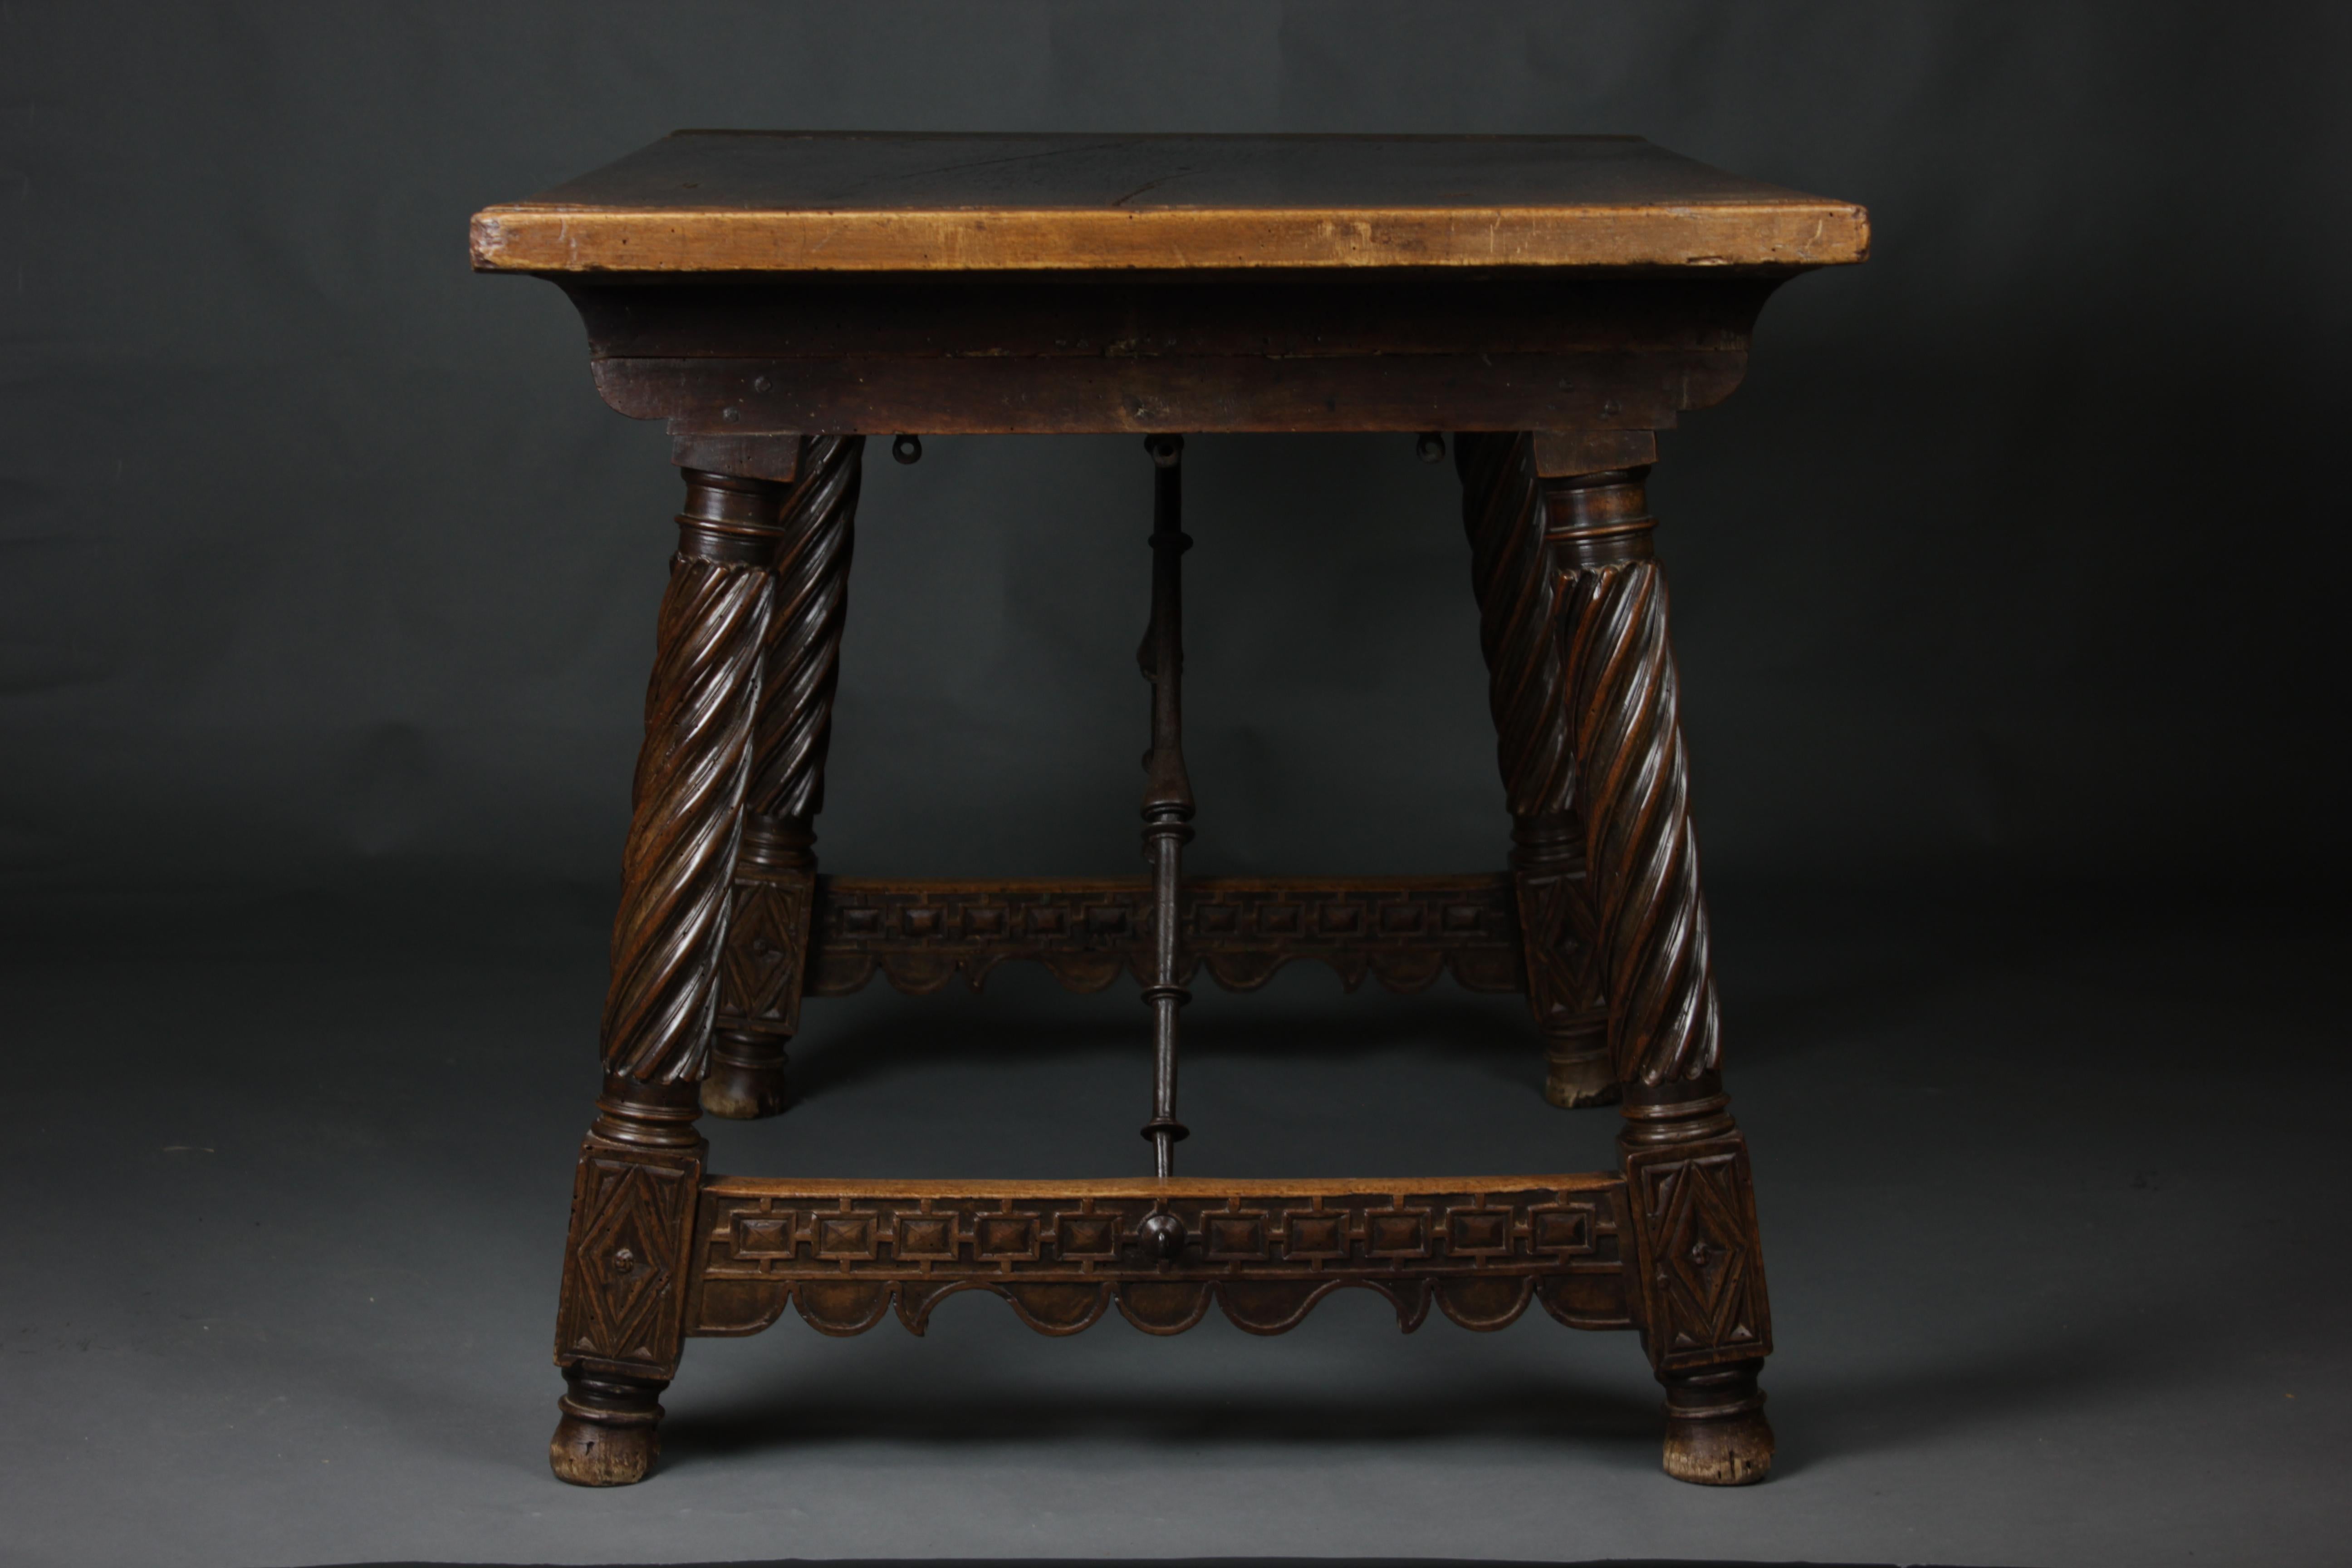 An impressive and illustrated 16th century Spanish walnut writing table, exemplifying unparalleled craftsmanship. The exquisite detailing on the legs, stretchers, and even on the bottom of the table top reveals the profound artistry that